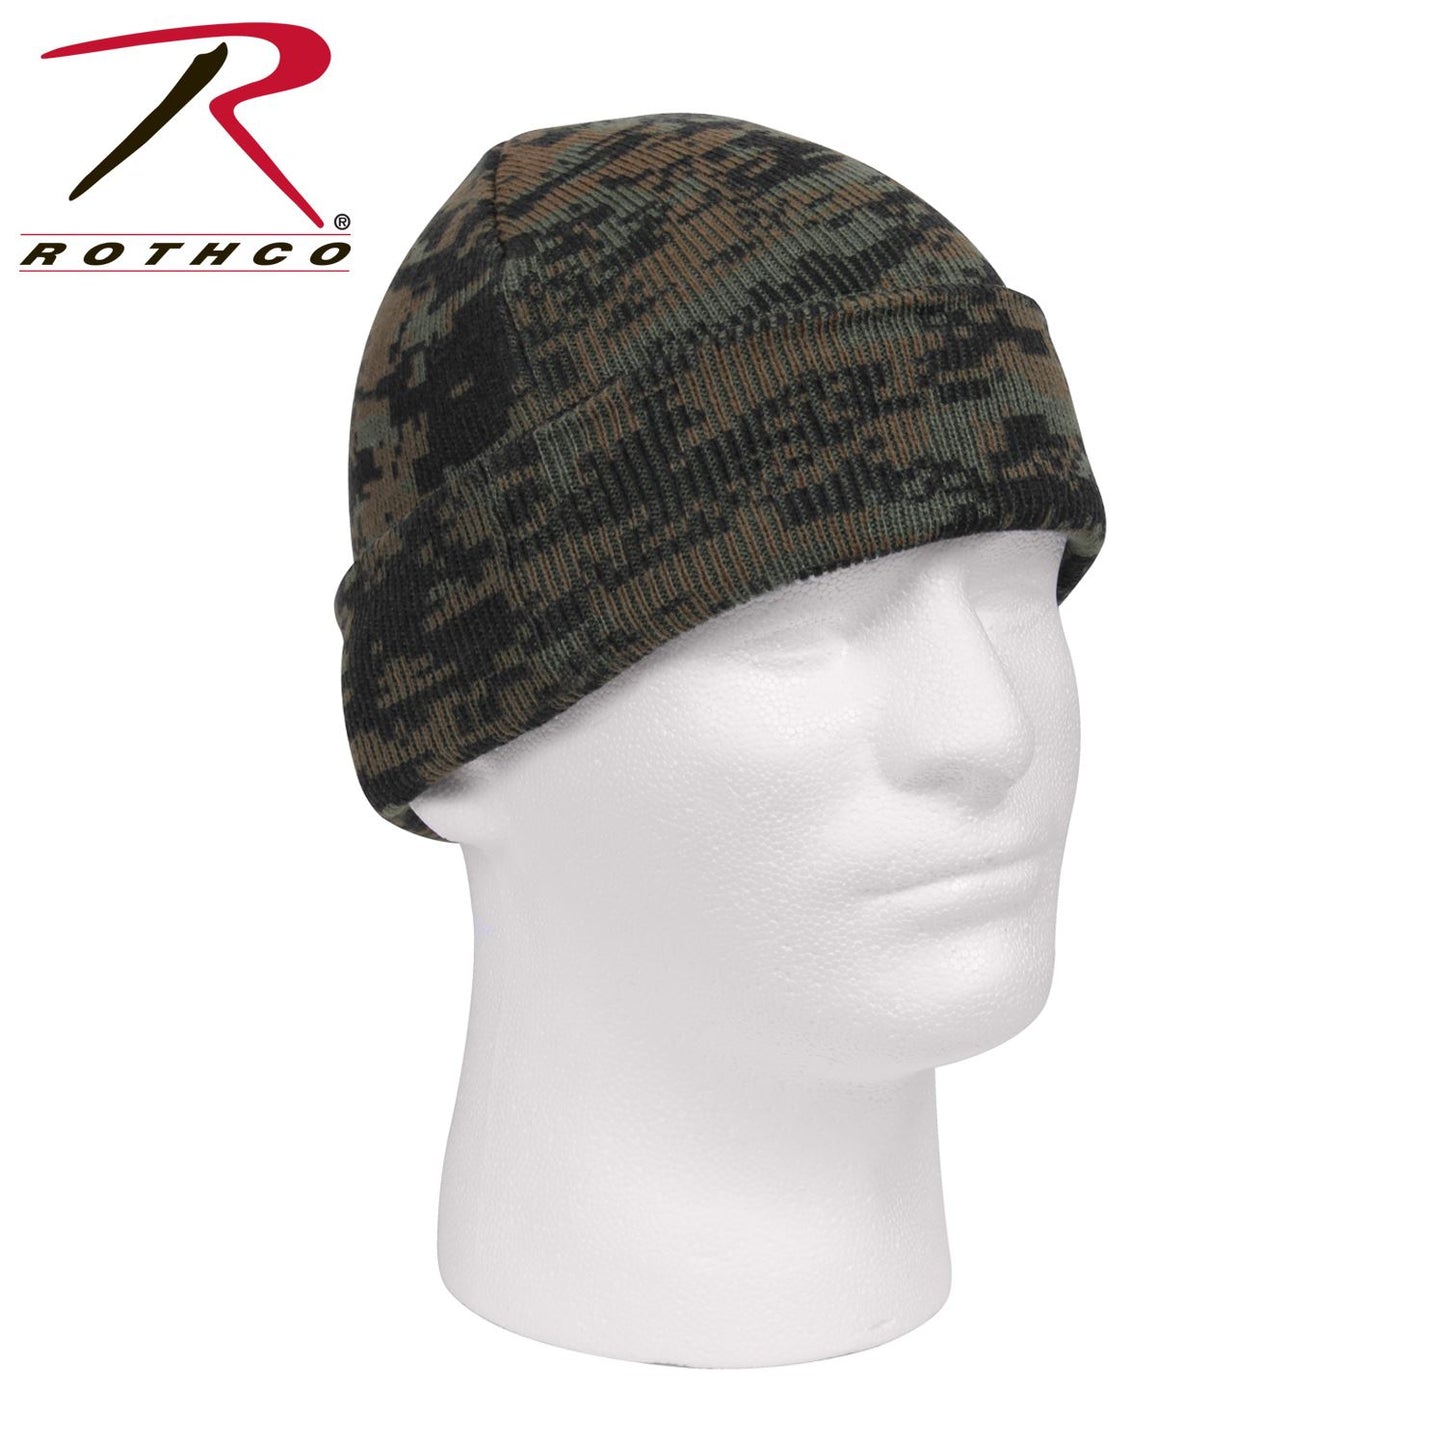 Rothco Deluxe Watch Cap